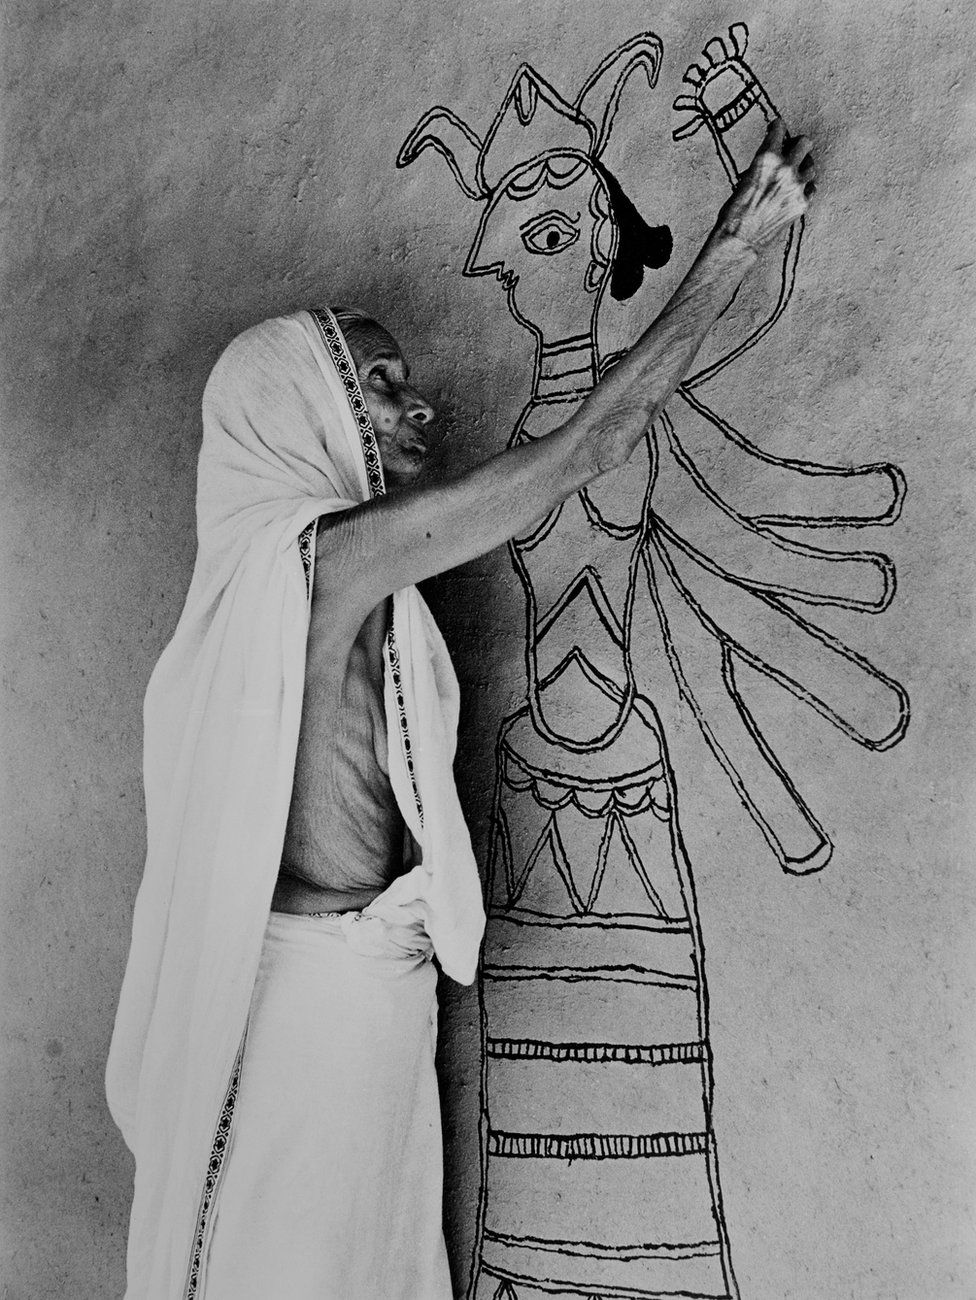 A woman from Mithila working on the initial stages of a mural of the goddess Durga, 1977